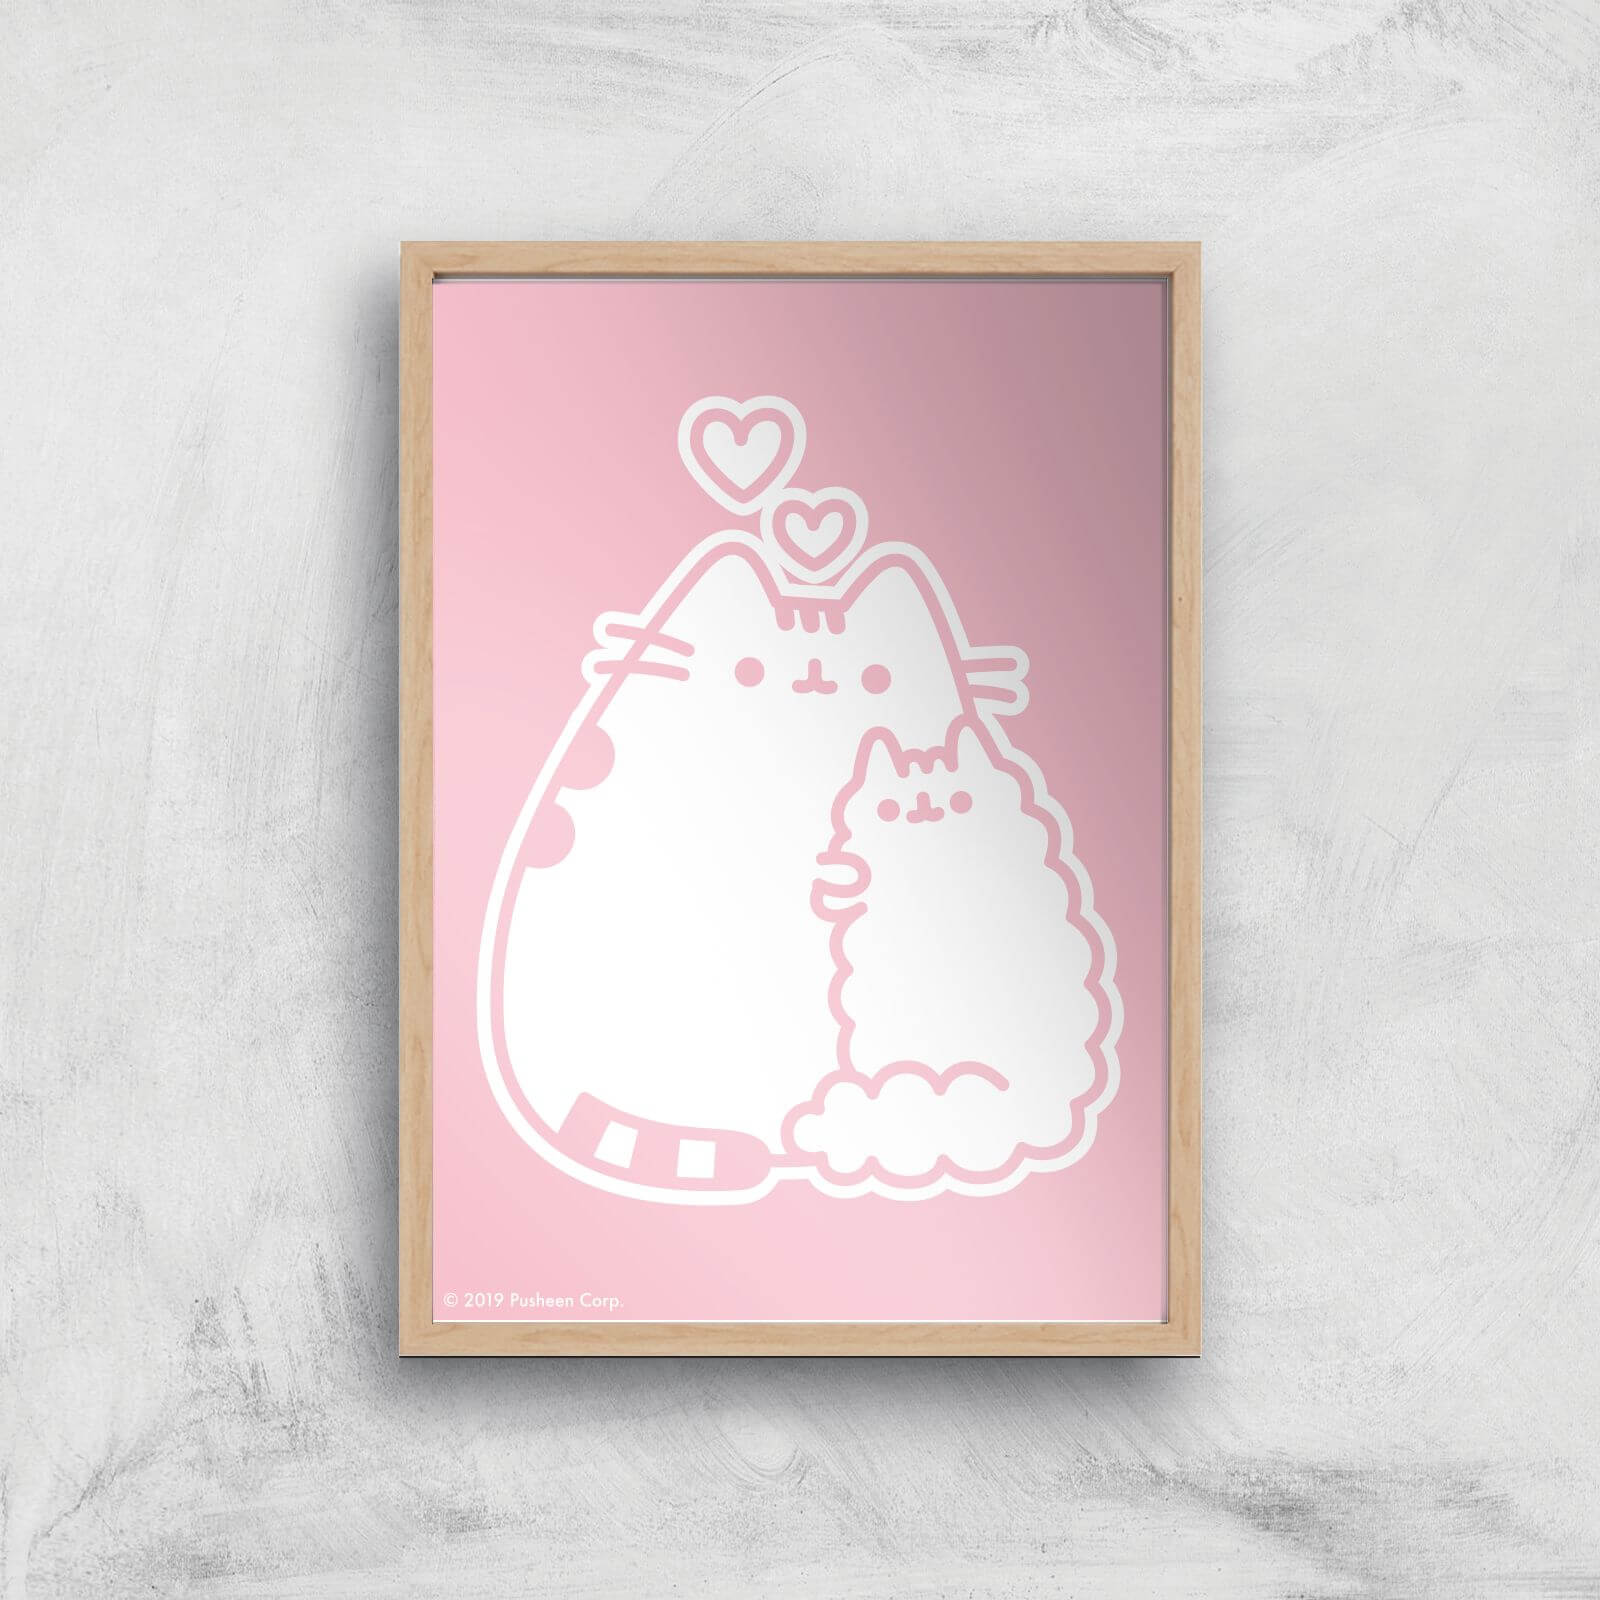 Pusheen Stormy I Love You Giclee Art Print - A4 - Wooden Frame